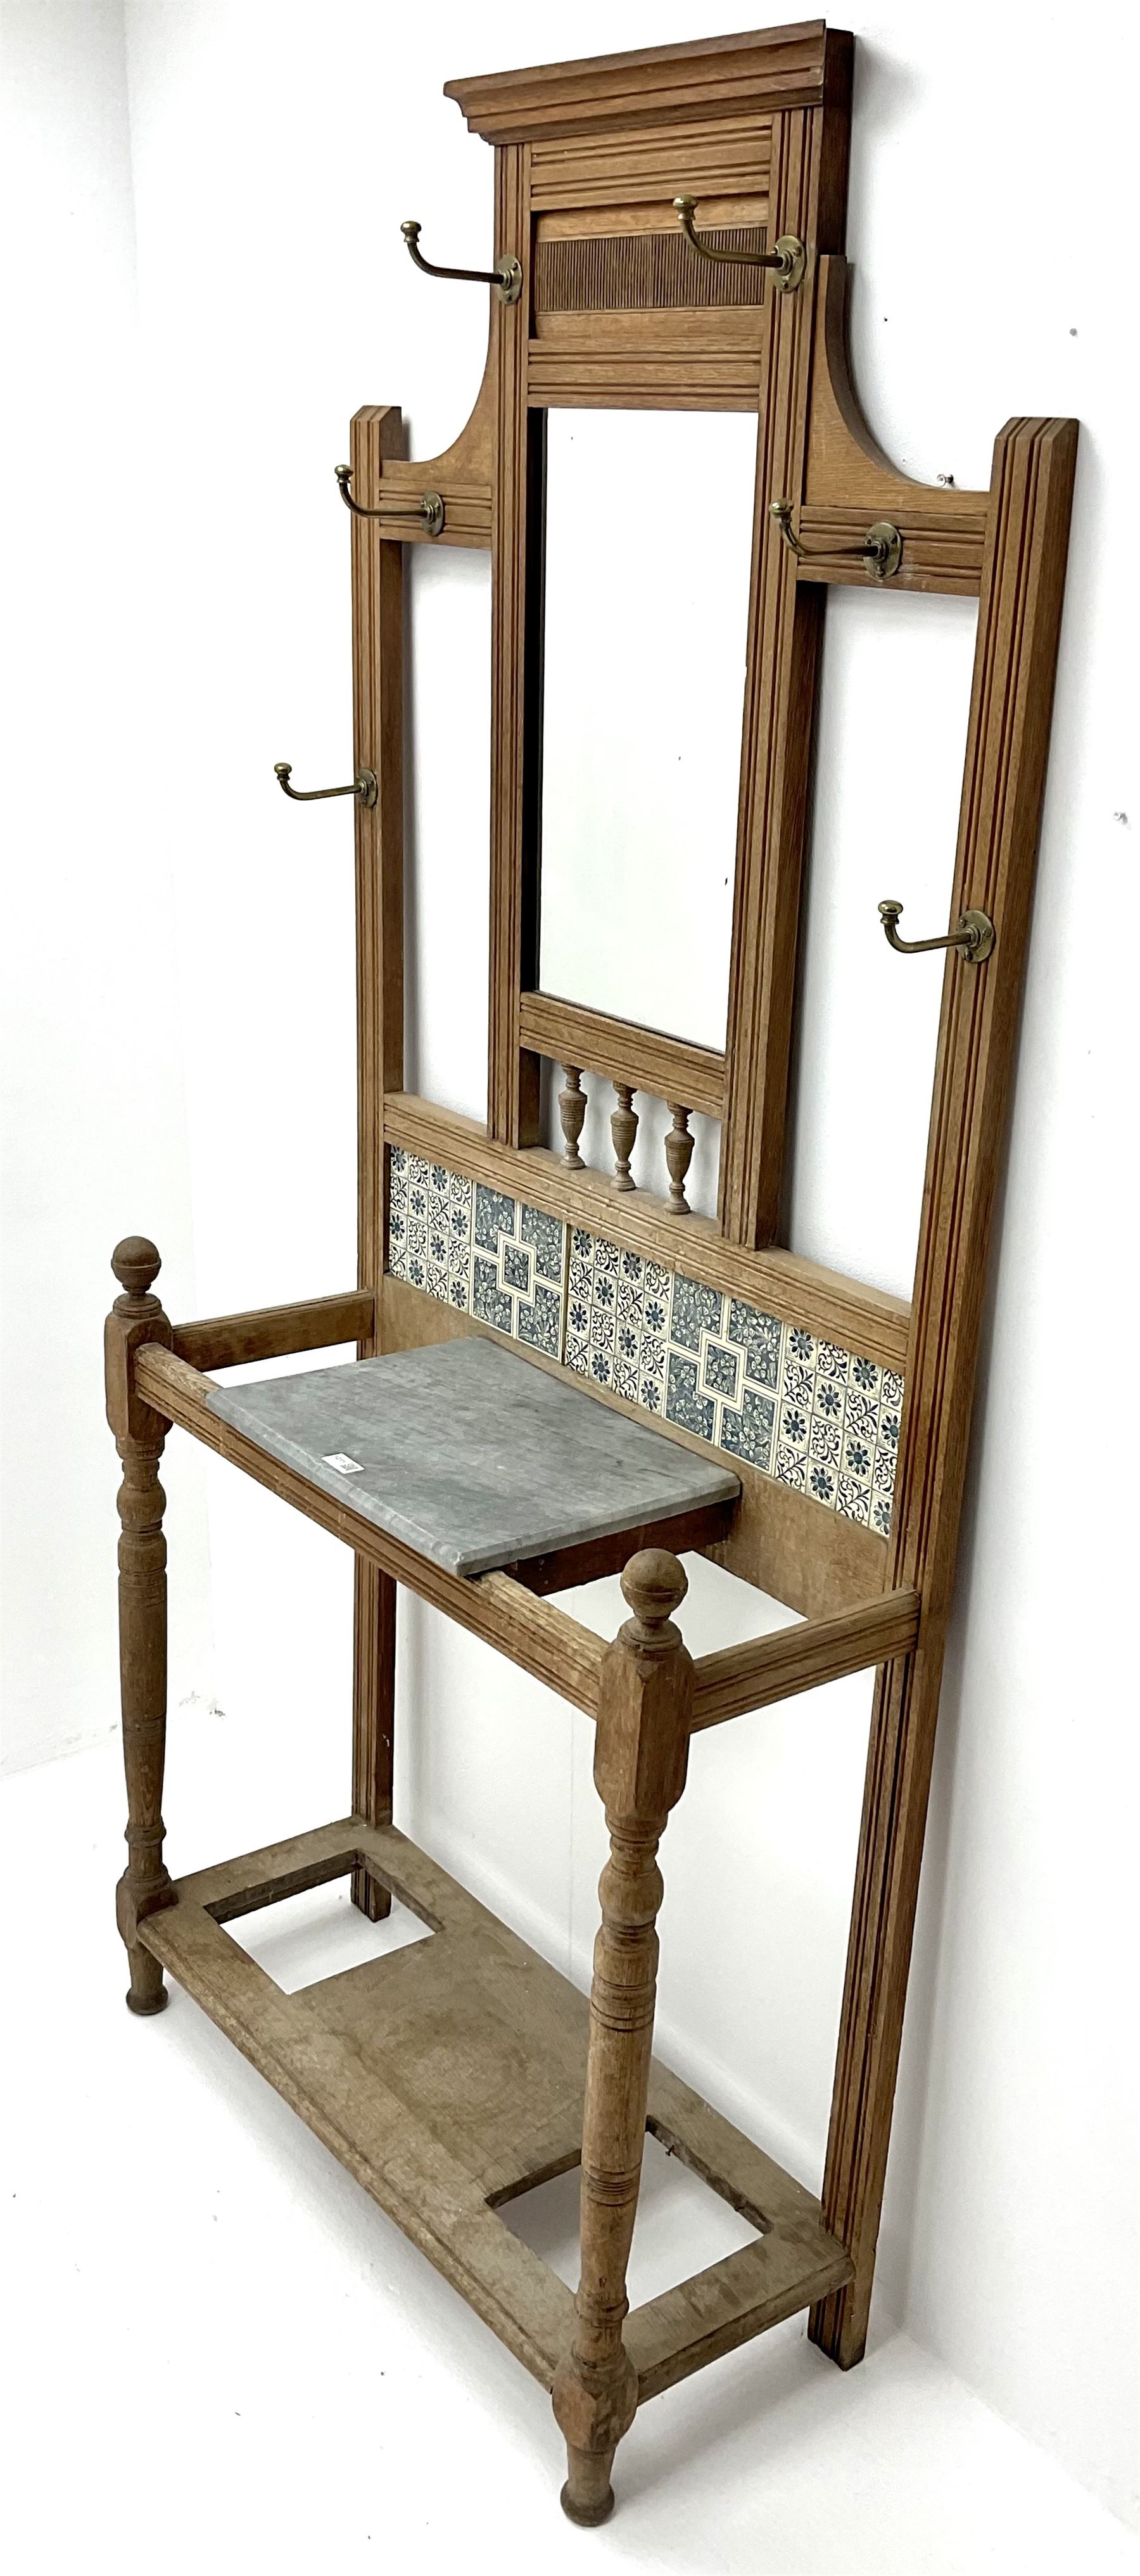 Edwardian walnut hallstand with centre mirror and tiled back - Image 2 of 4